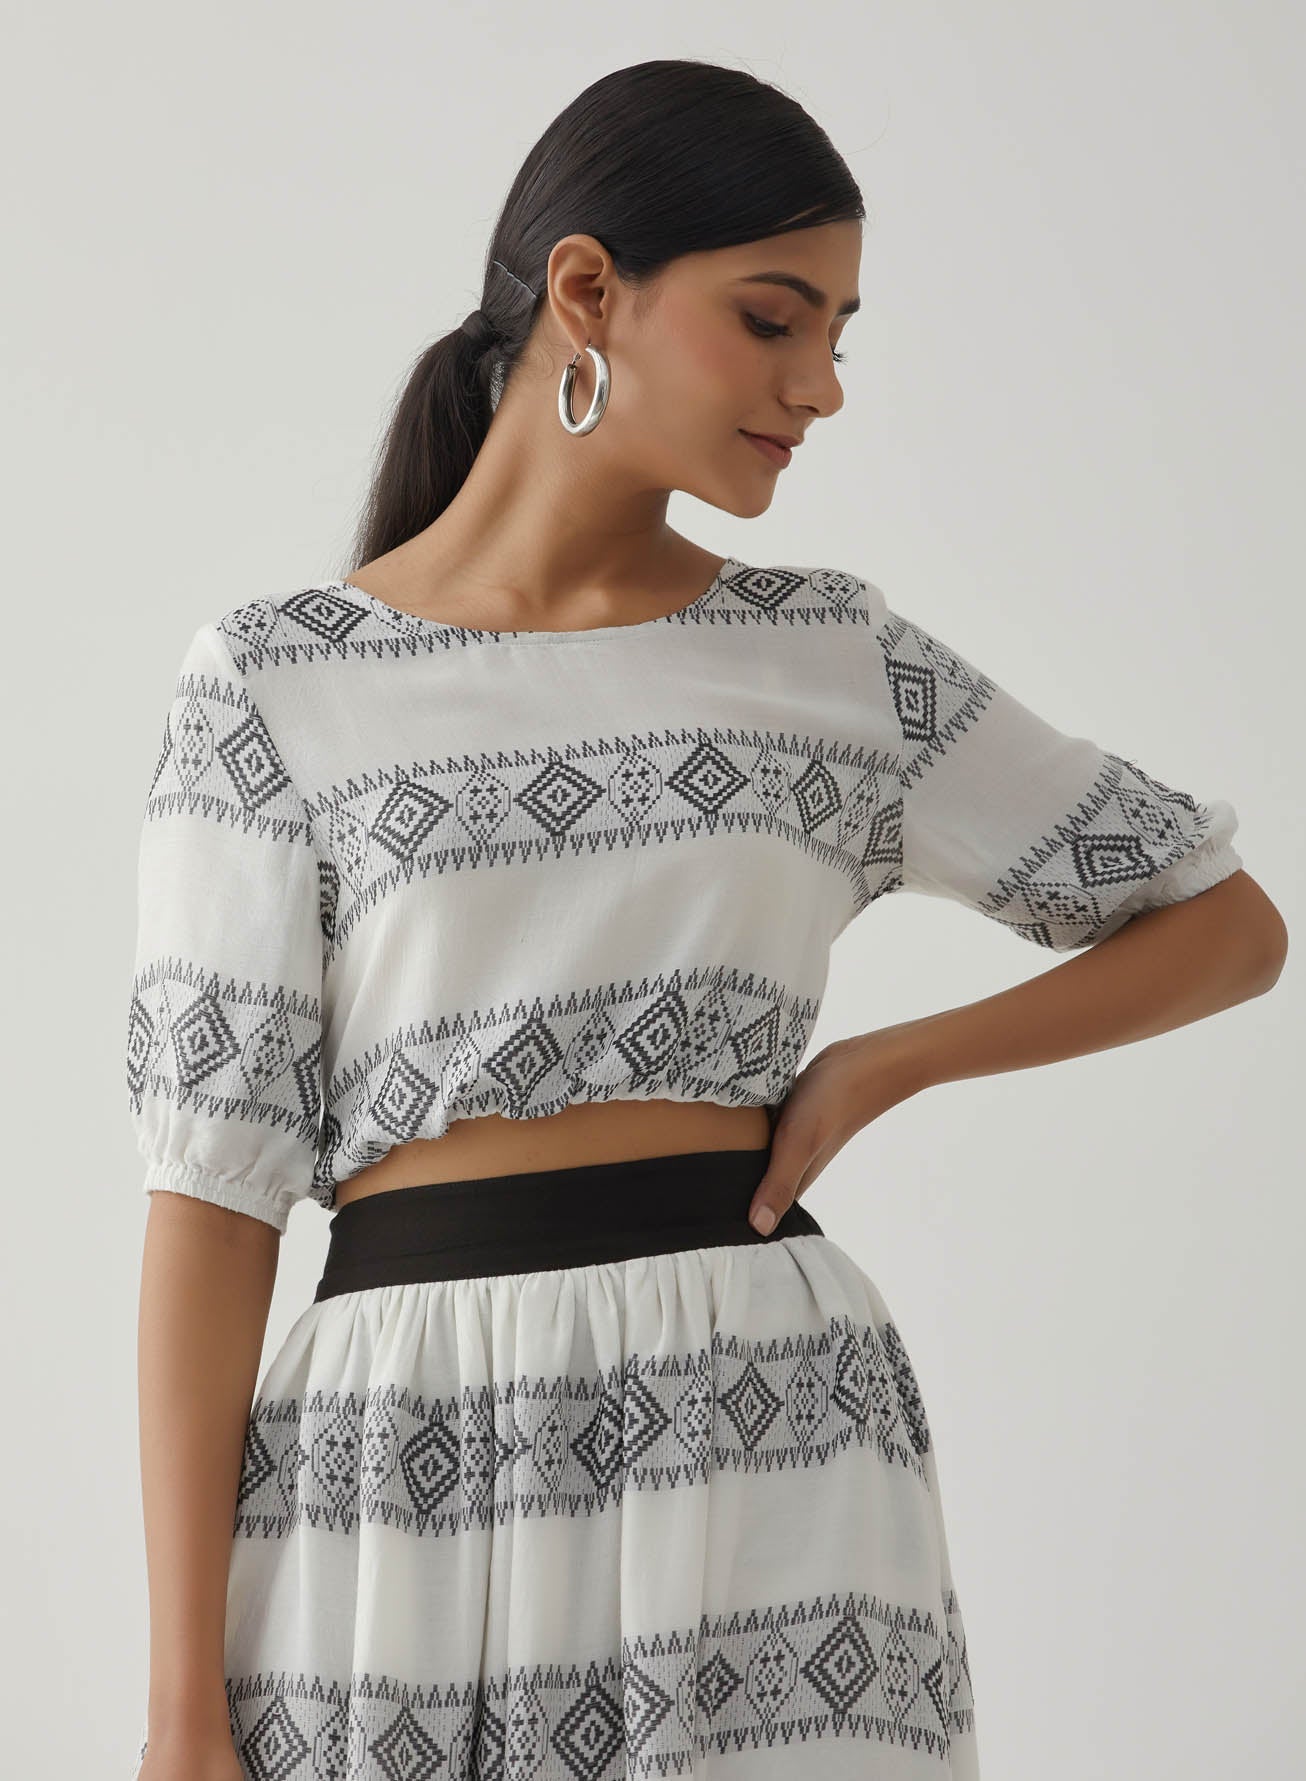 White/Black Crop Top - The Indian Cause